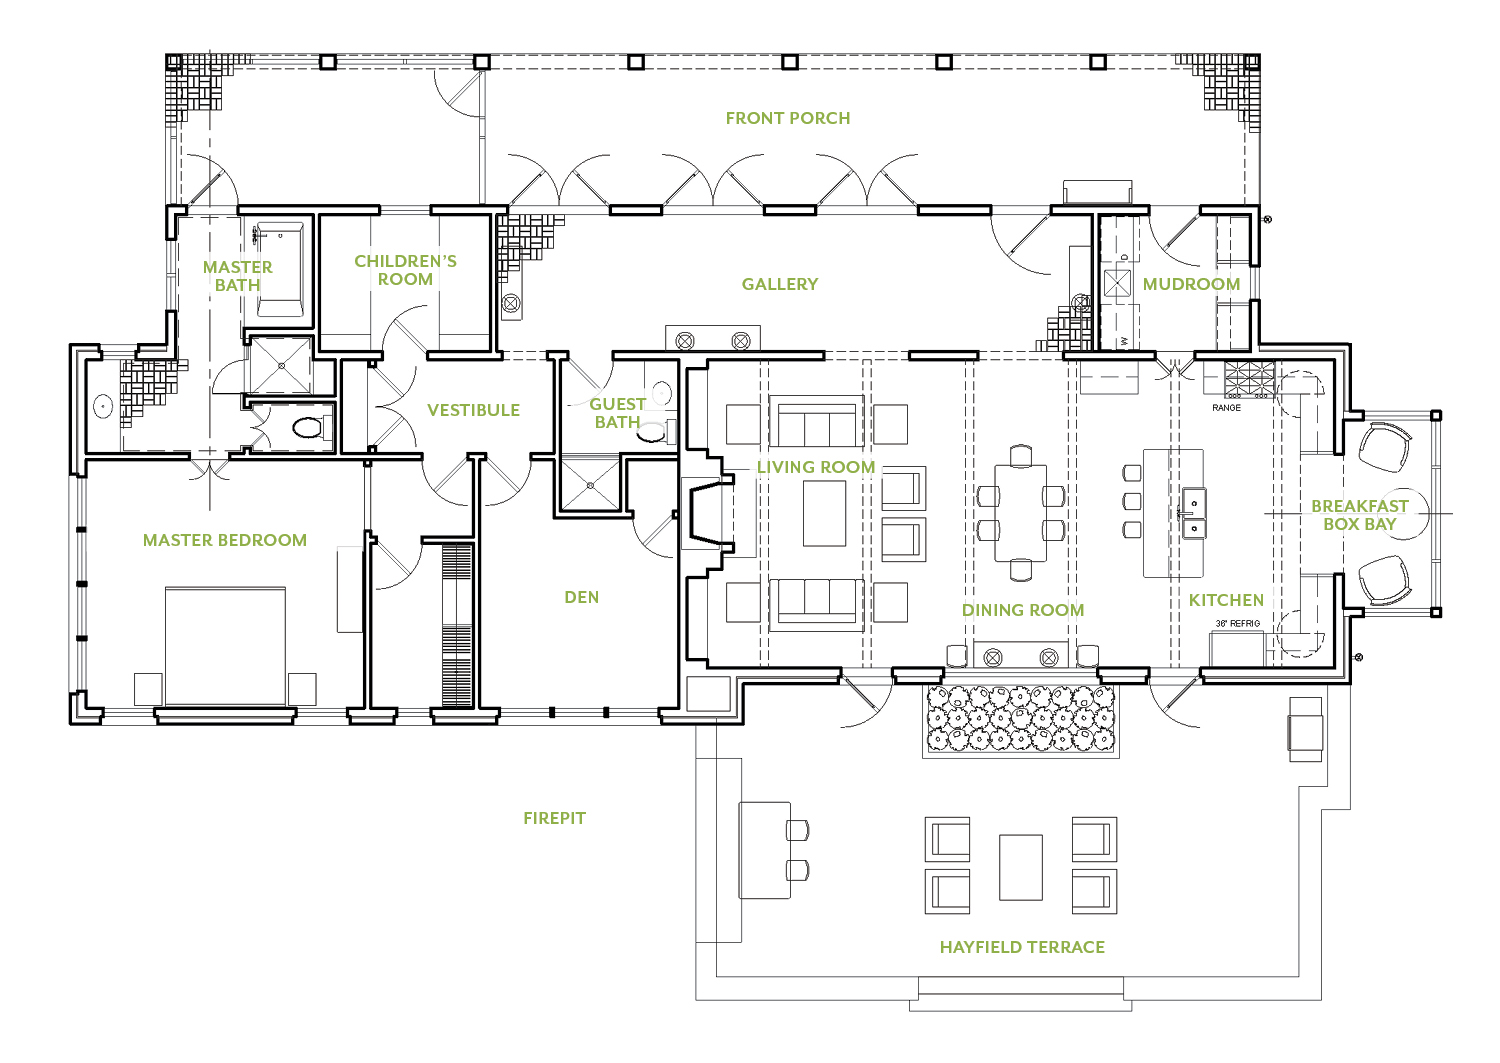 Floor plan for the 2021 Flower magazine's showhouse at Brierfield Farm n Bibb County, AL